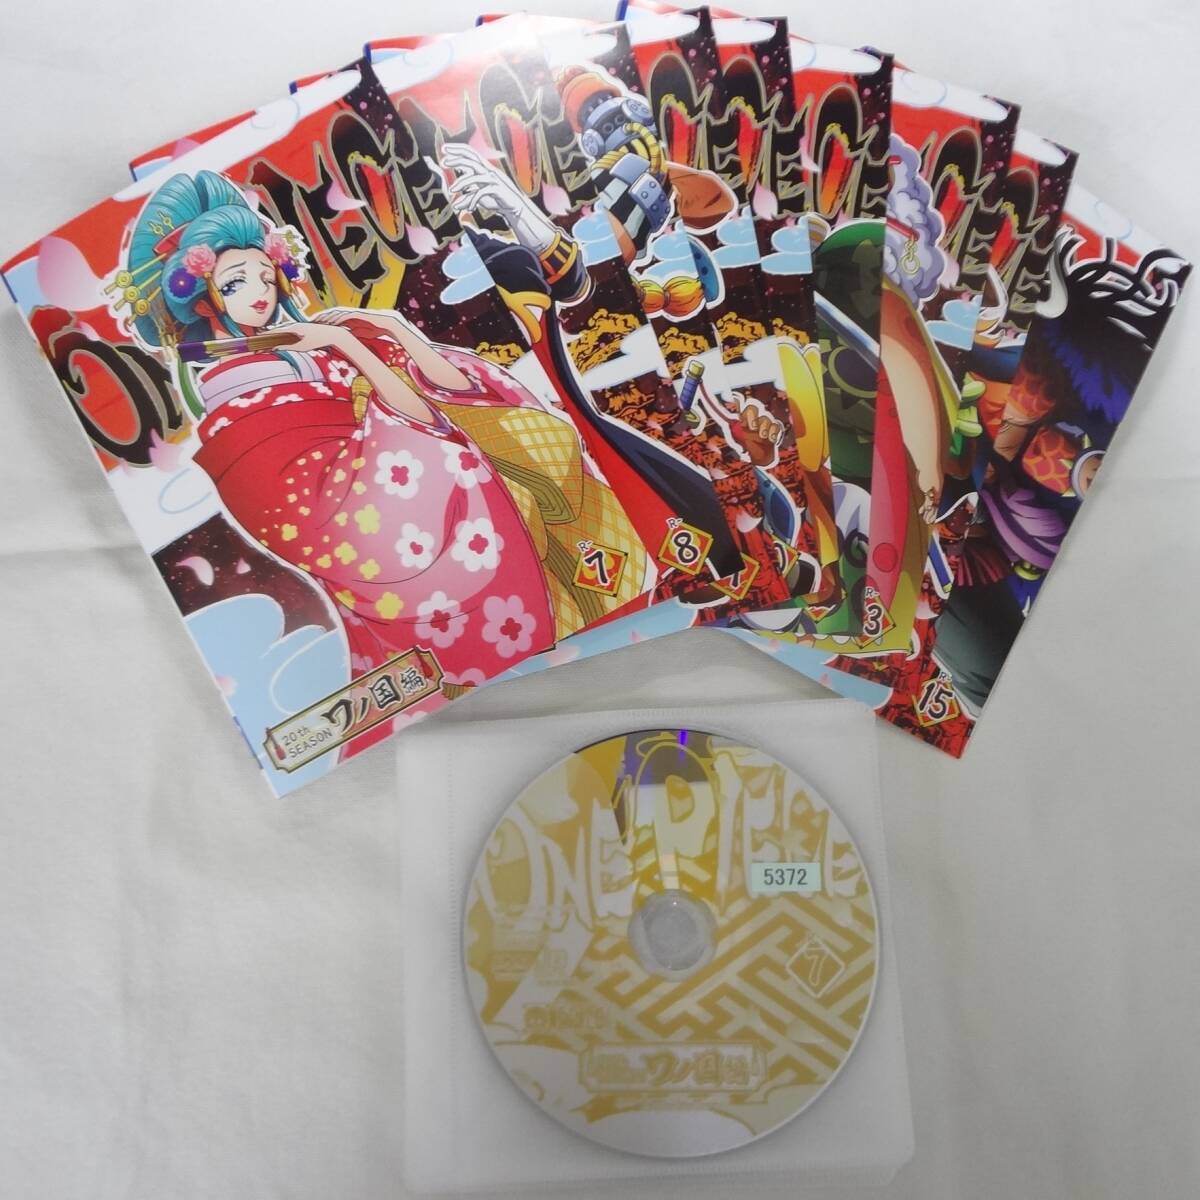  free shipping rental used DVD ONE PIECE One-piece 20th season wano country compilation second curtain all 10 volume set 